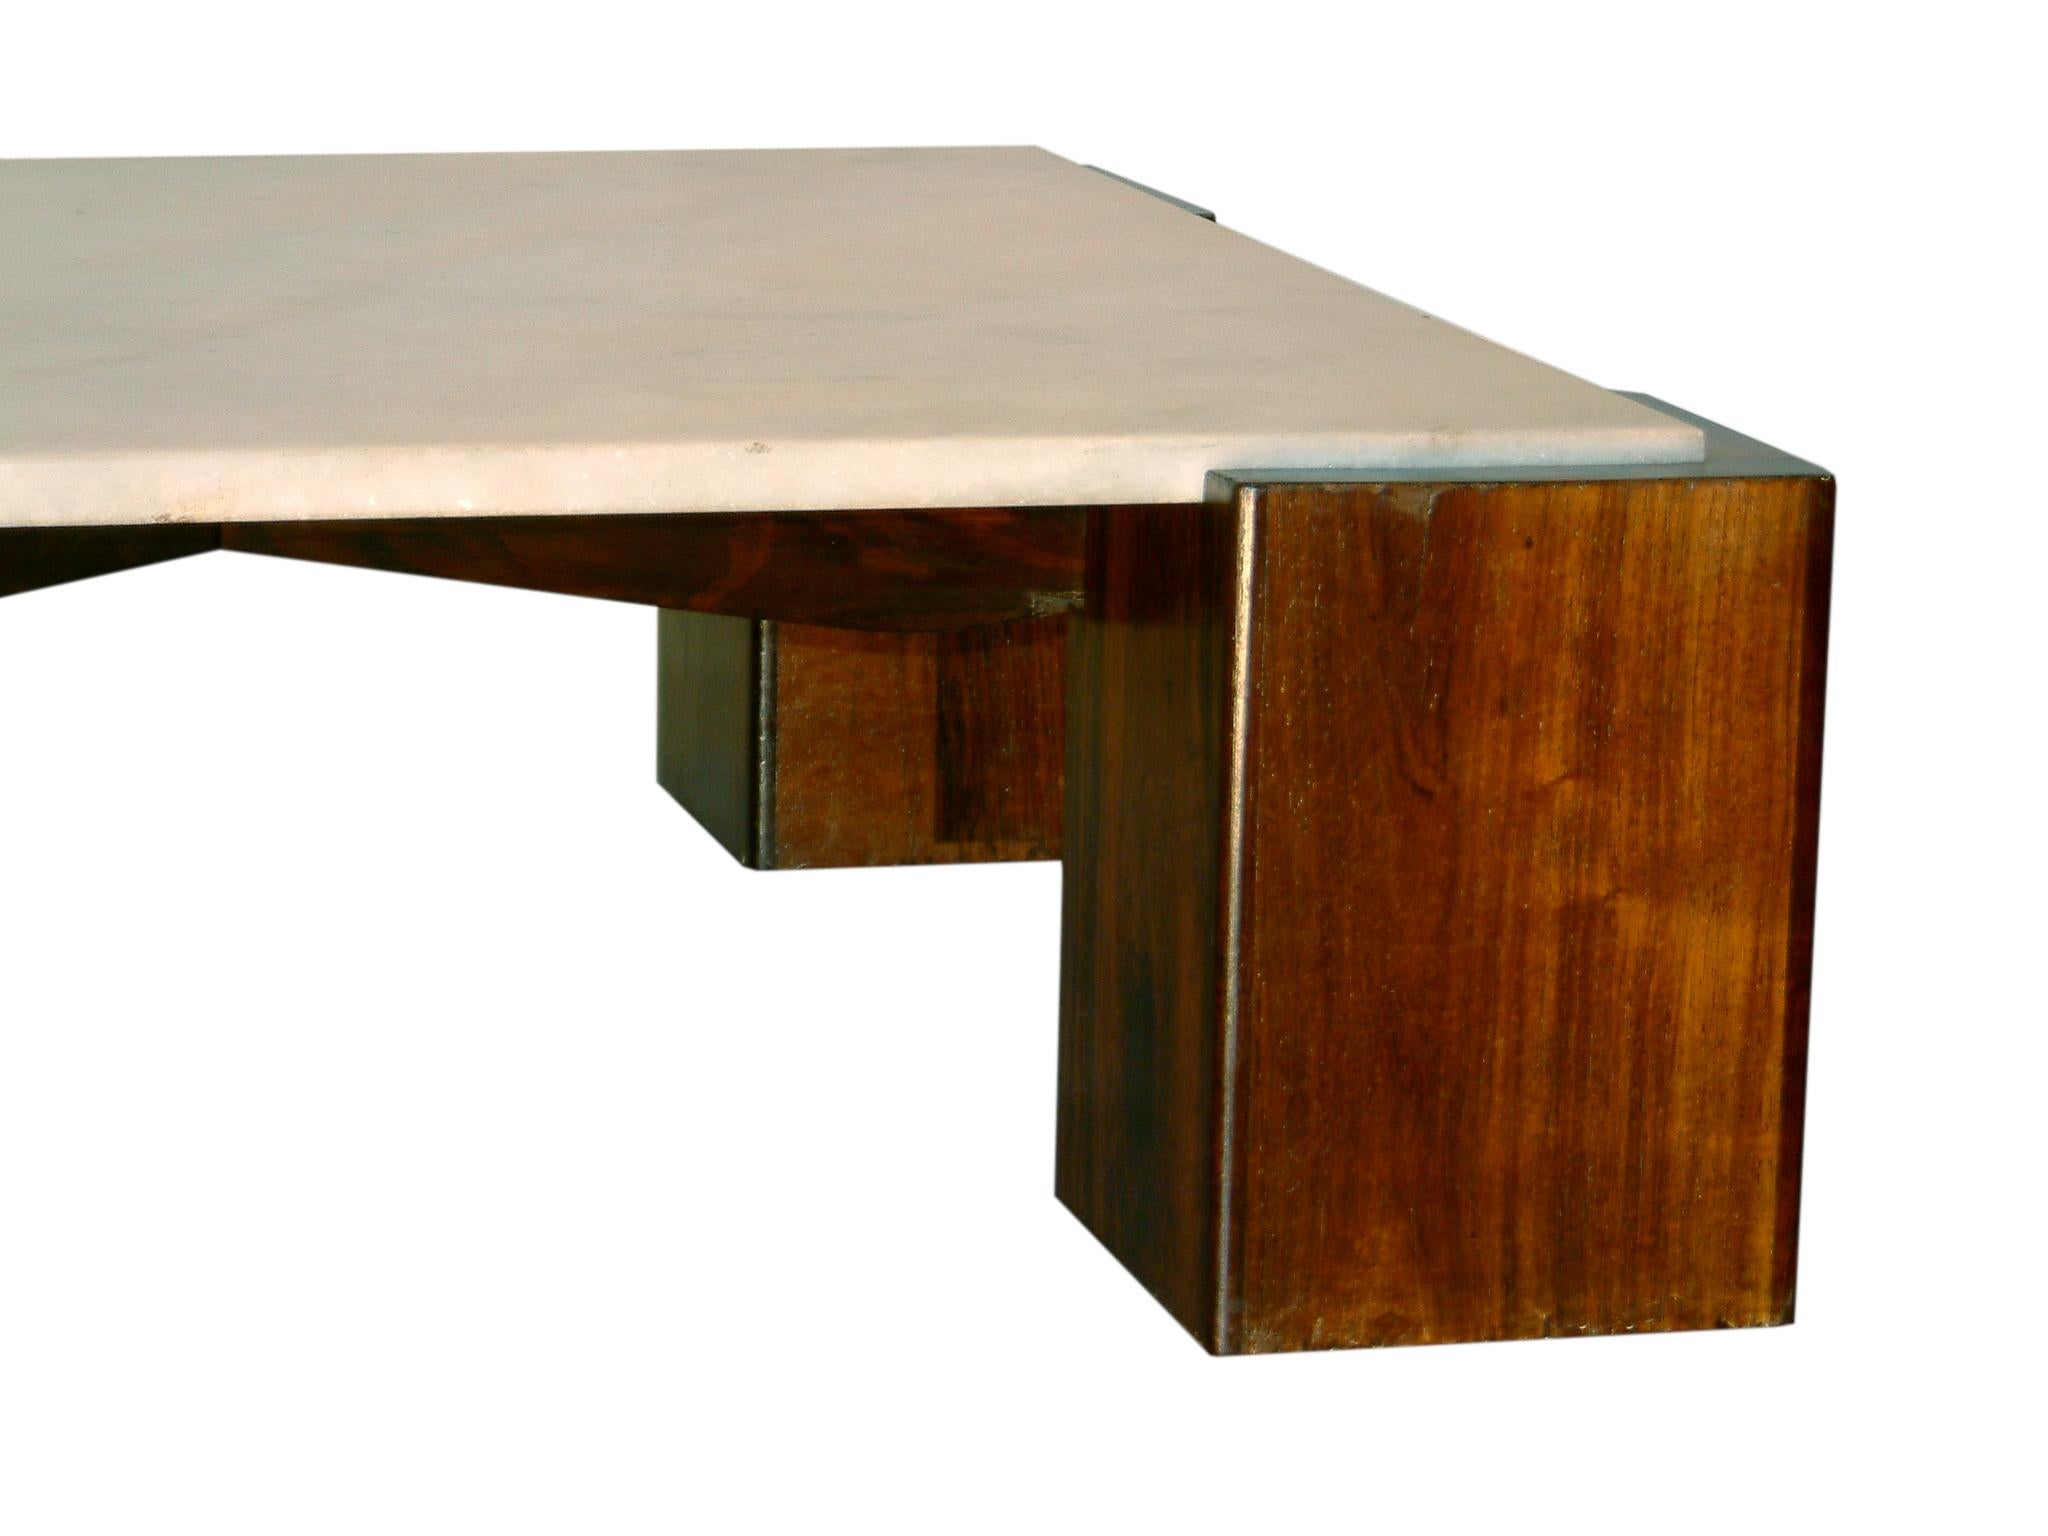 Square coffee table with four rosewood legs and inset marble top, Brazil, 1950s.
 